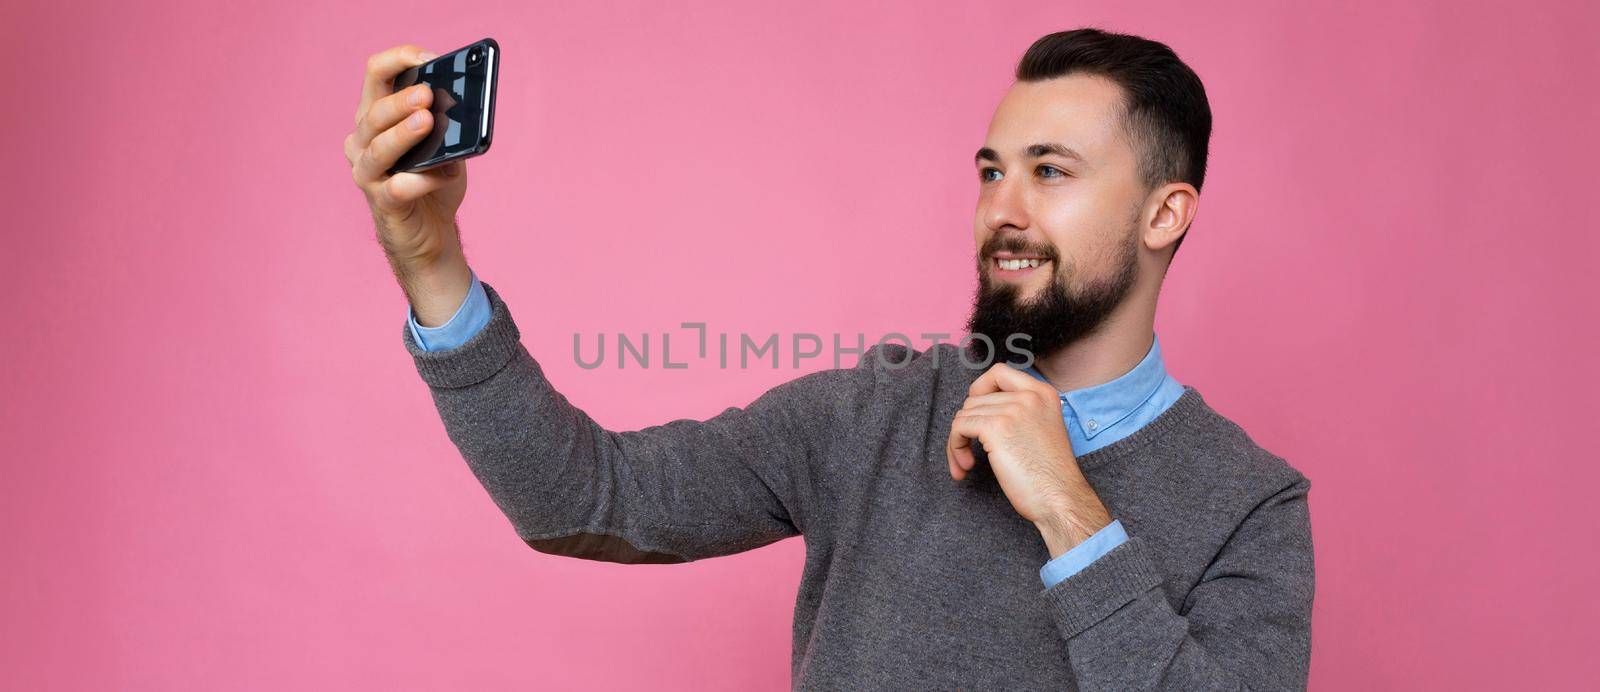 panoramic photo of Handsome young man wearing casual stylish clothes standing isolated over background wall holding smartphone taking selfie photo looking at mobile phone screen display.